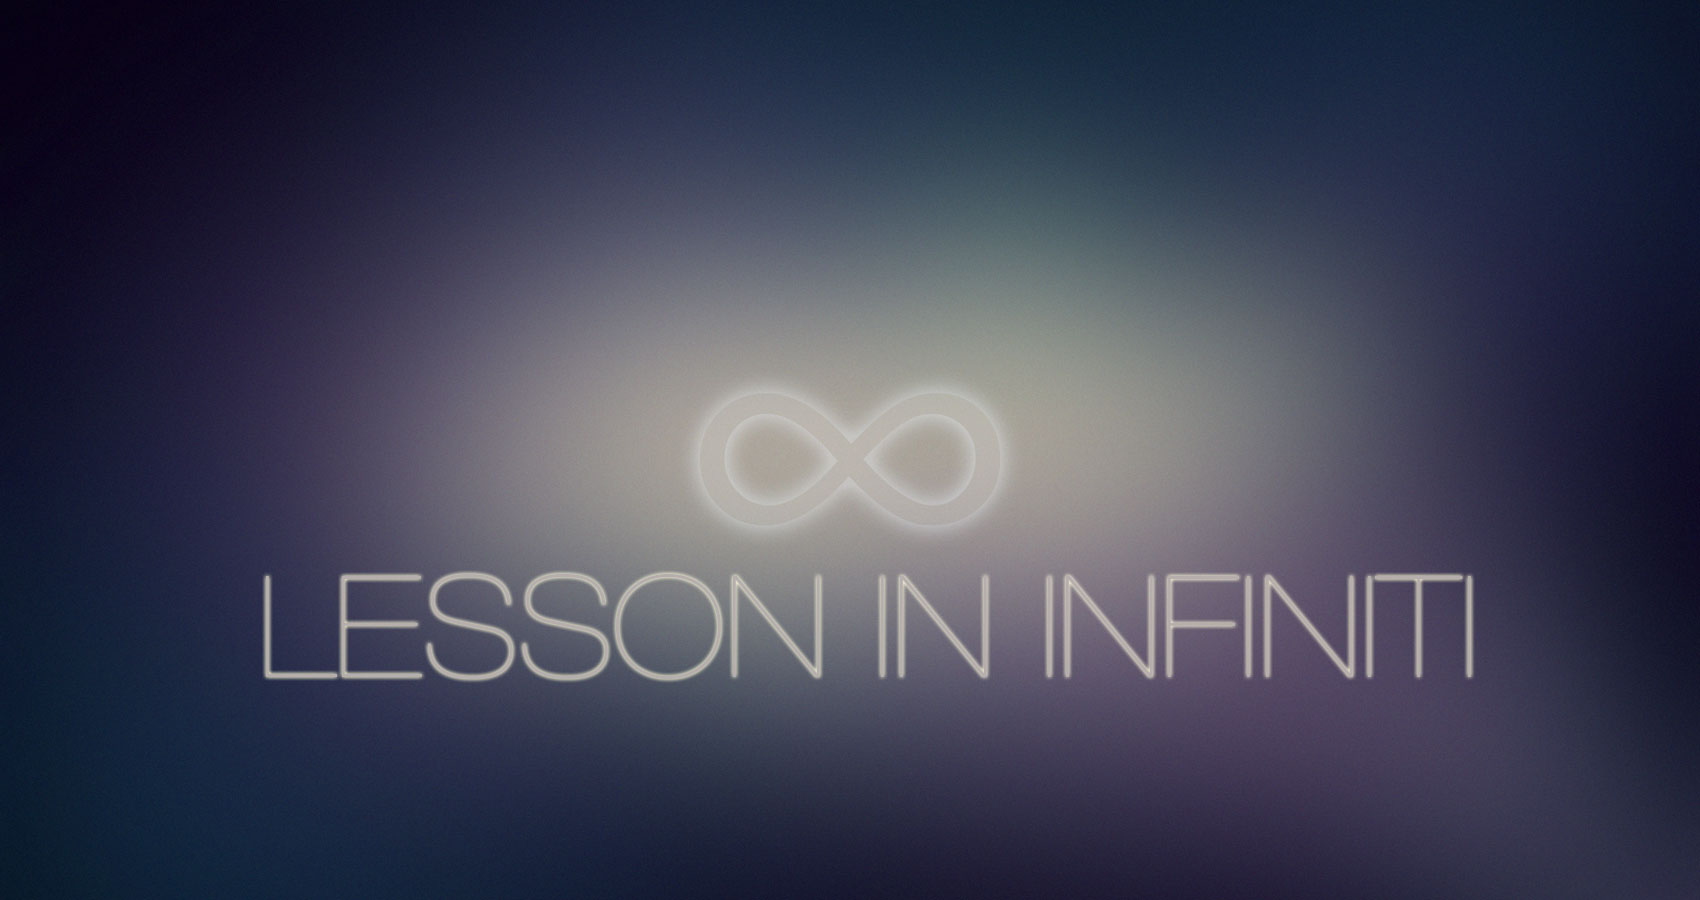 Lesson in infiniti by Don Knowles at Spillwords.com